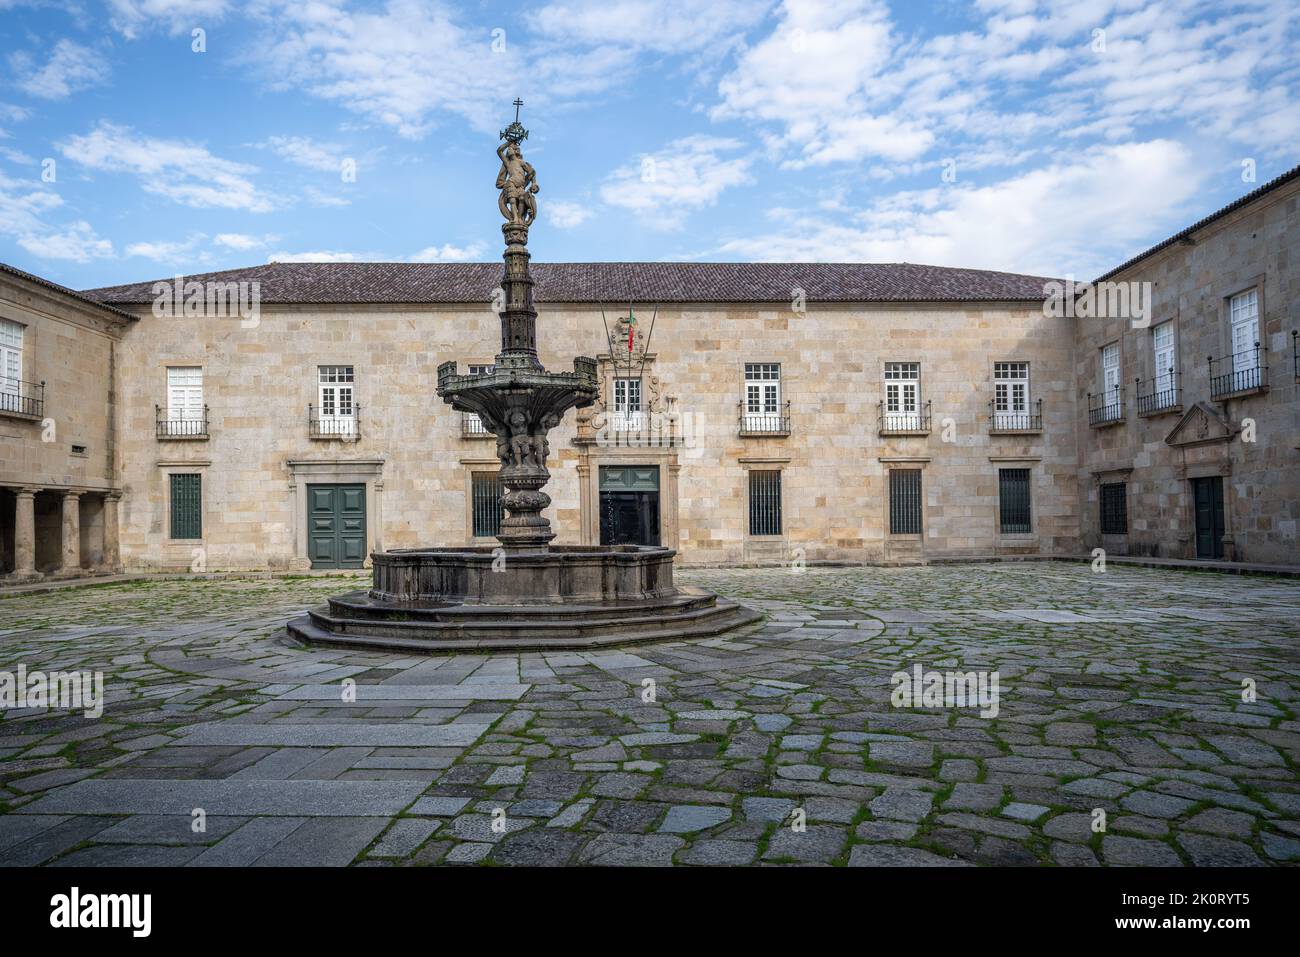 Castle Fountain and Archiepiscopal Palace at Largo do Paço - Braga, Portugal Stock Photo